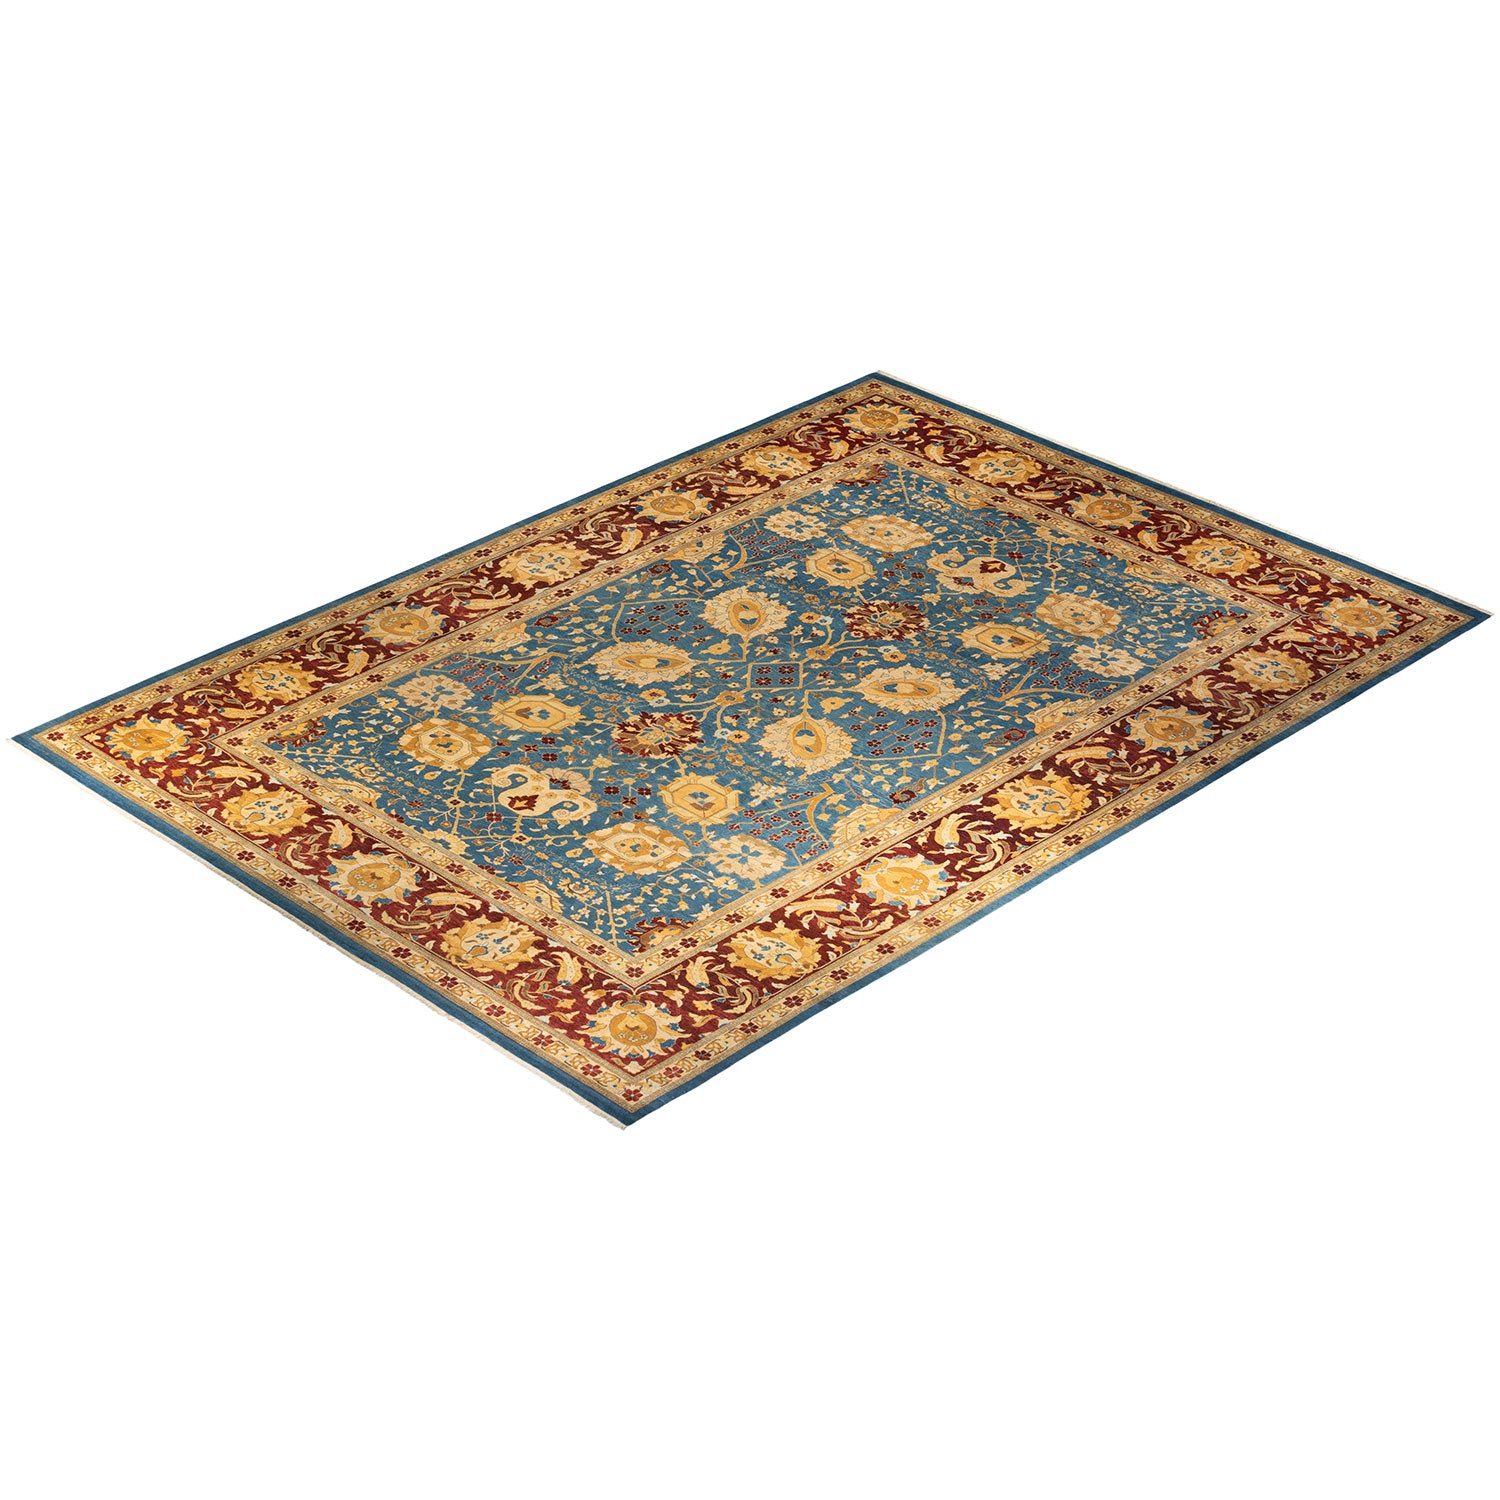 Exquisite Persian-inspired area rug with intricate blue and gold patterns.